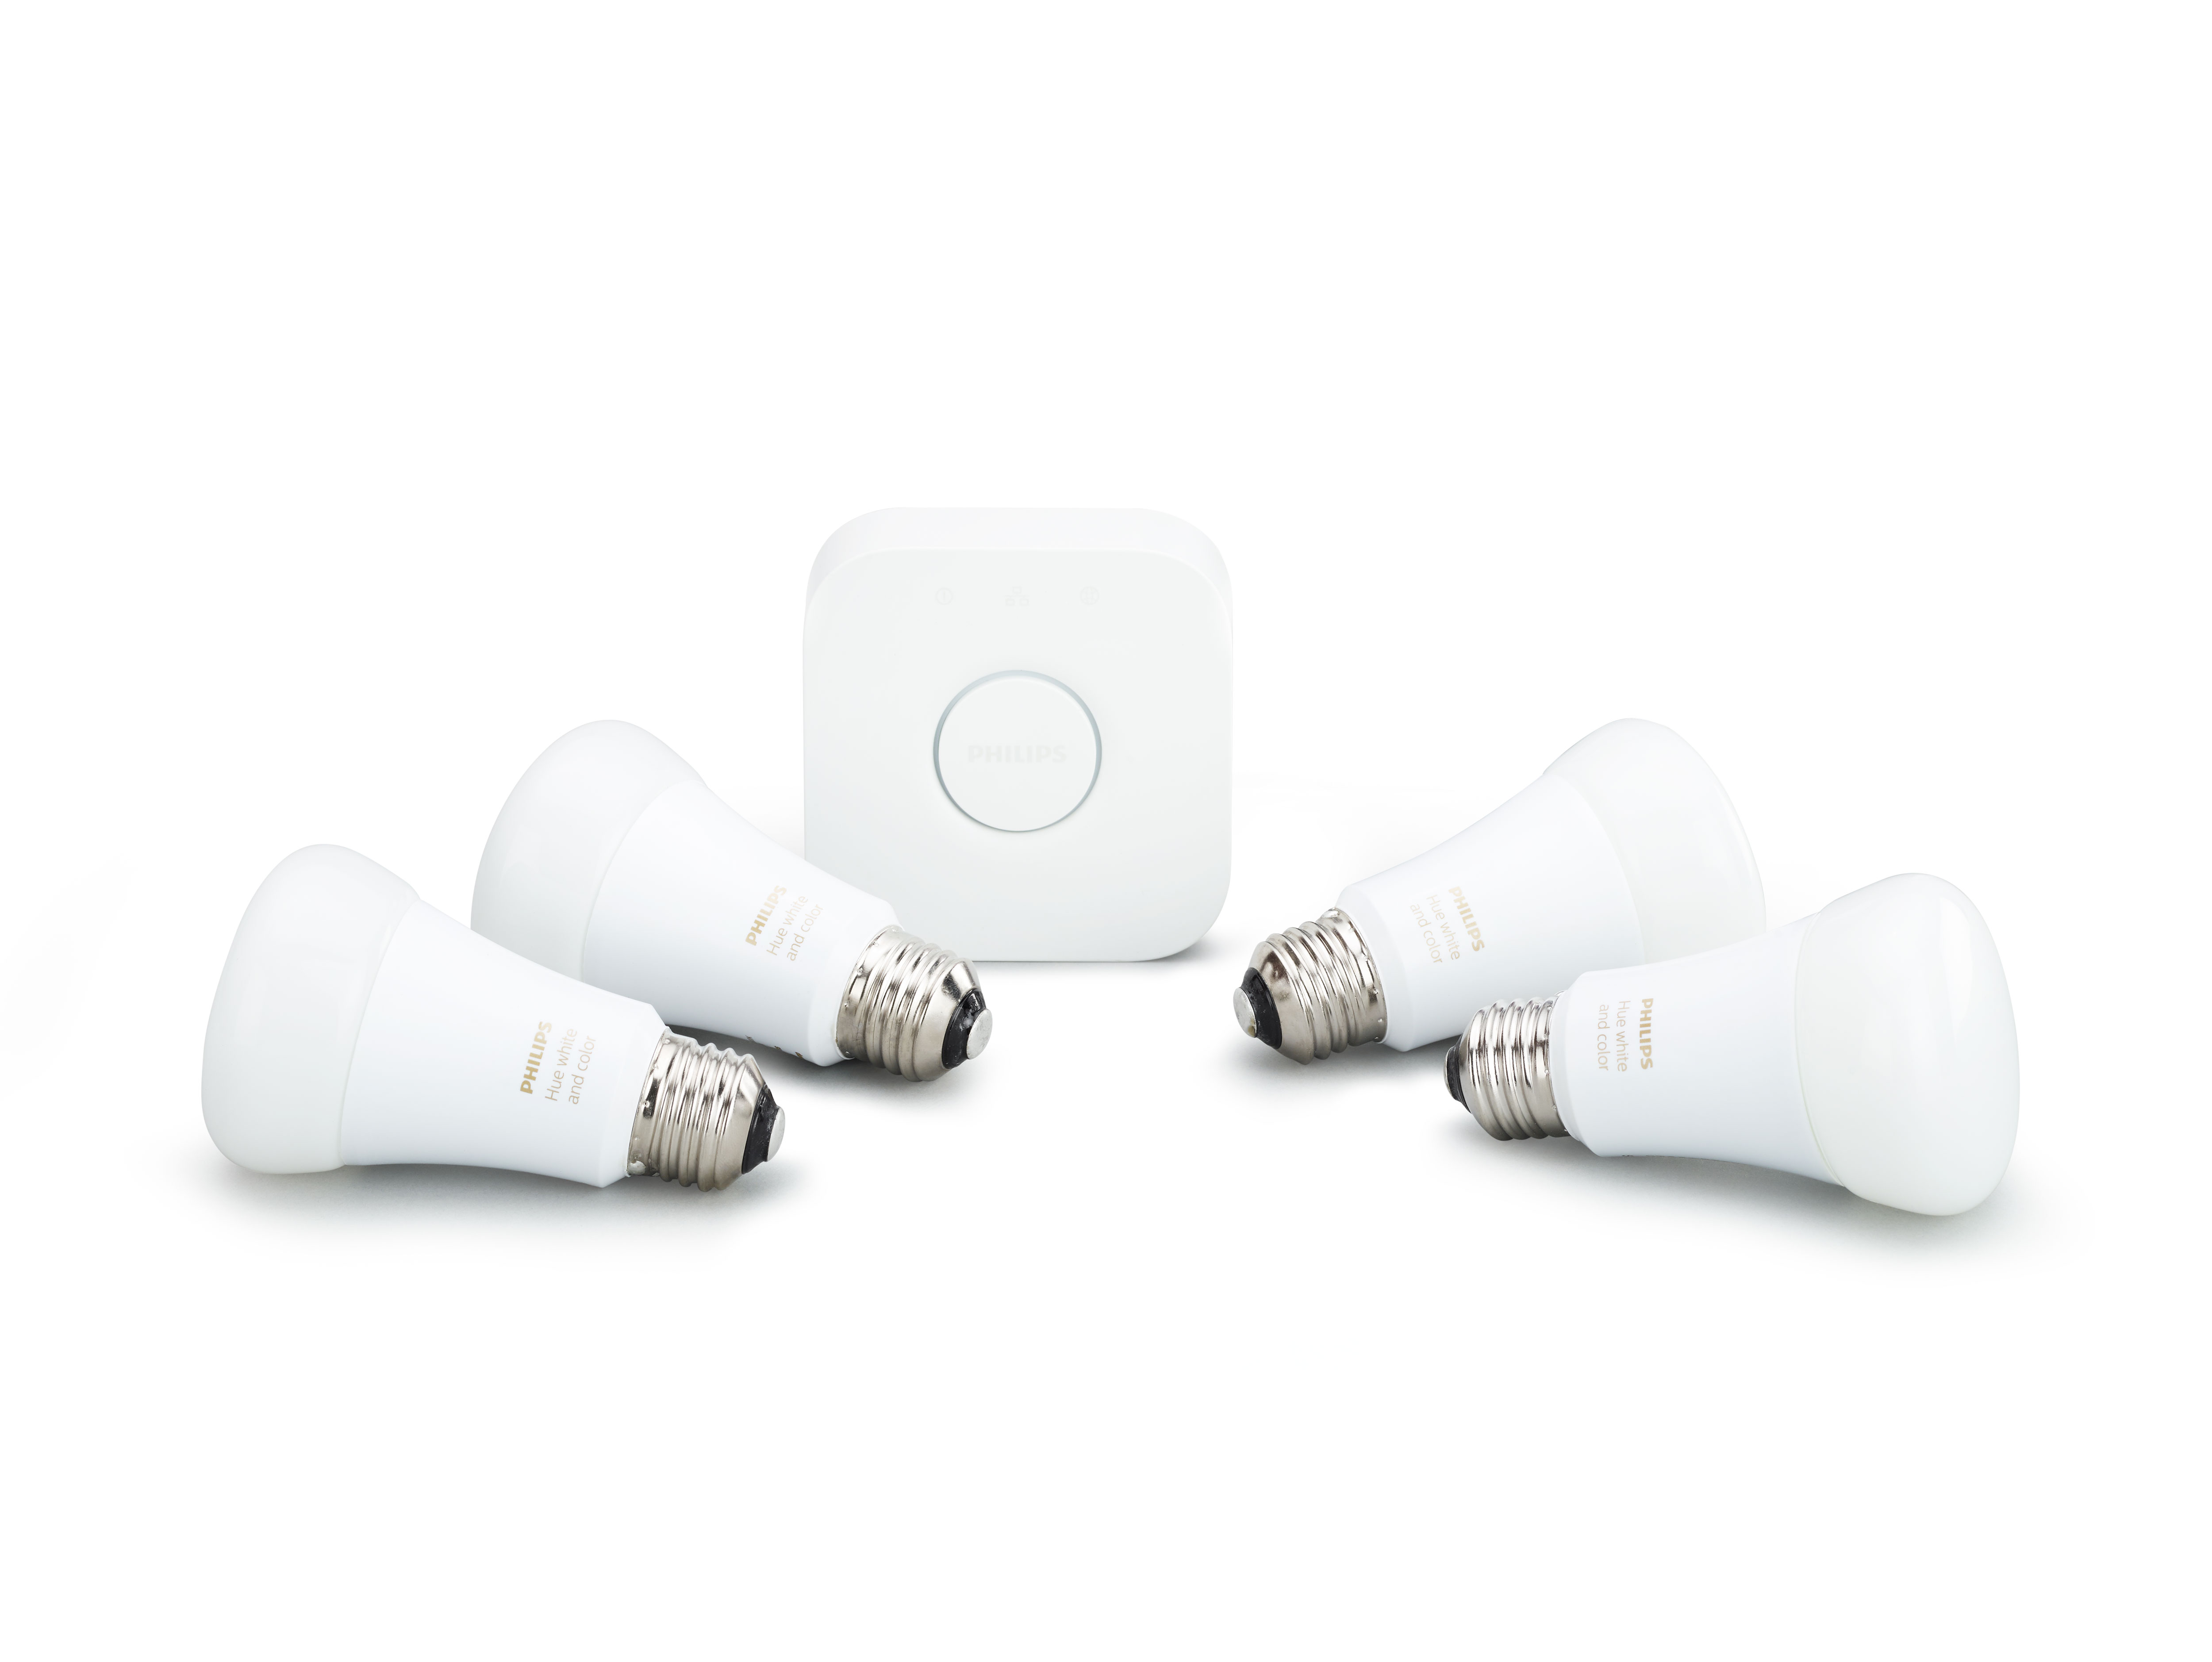 Philips Hue White and Color Ambiance A19 Smart Light Starter Kit, 60W LED, 4-Pack - image 3 of 7